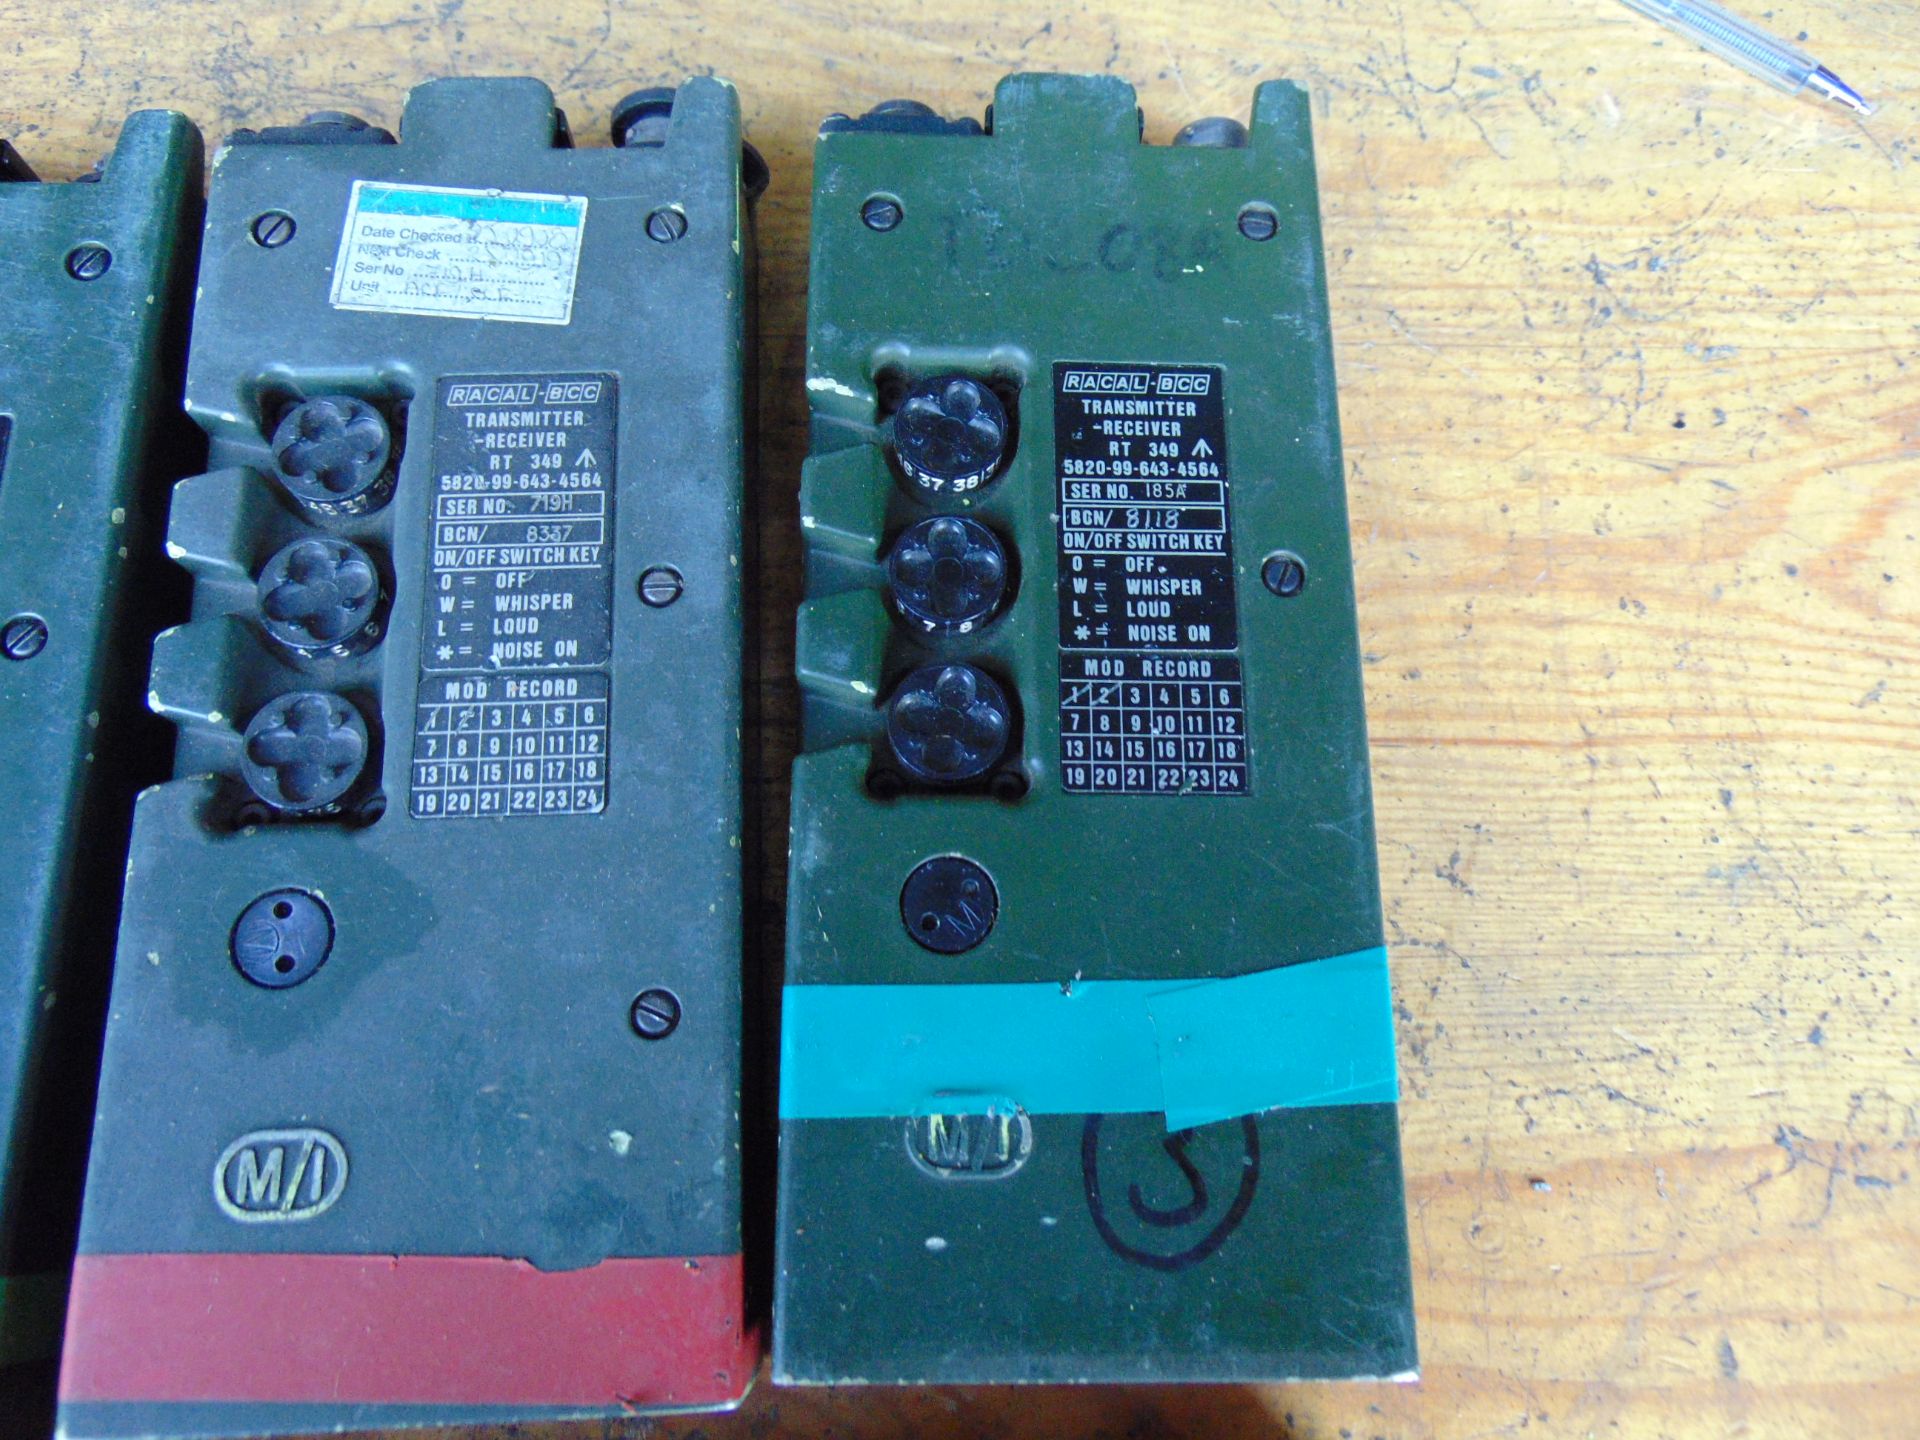 6 x Clansman UK/RT 349 Transmitter Receivers c/w Battery Pack - Image 2 of 5